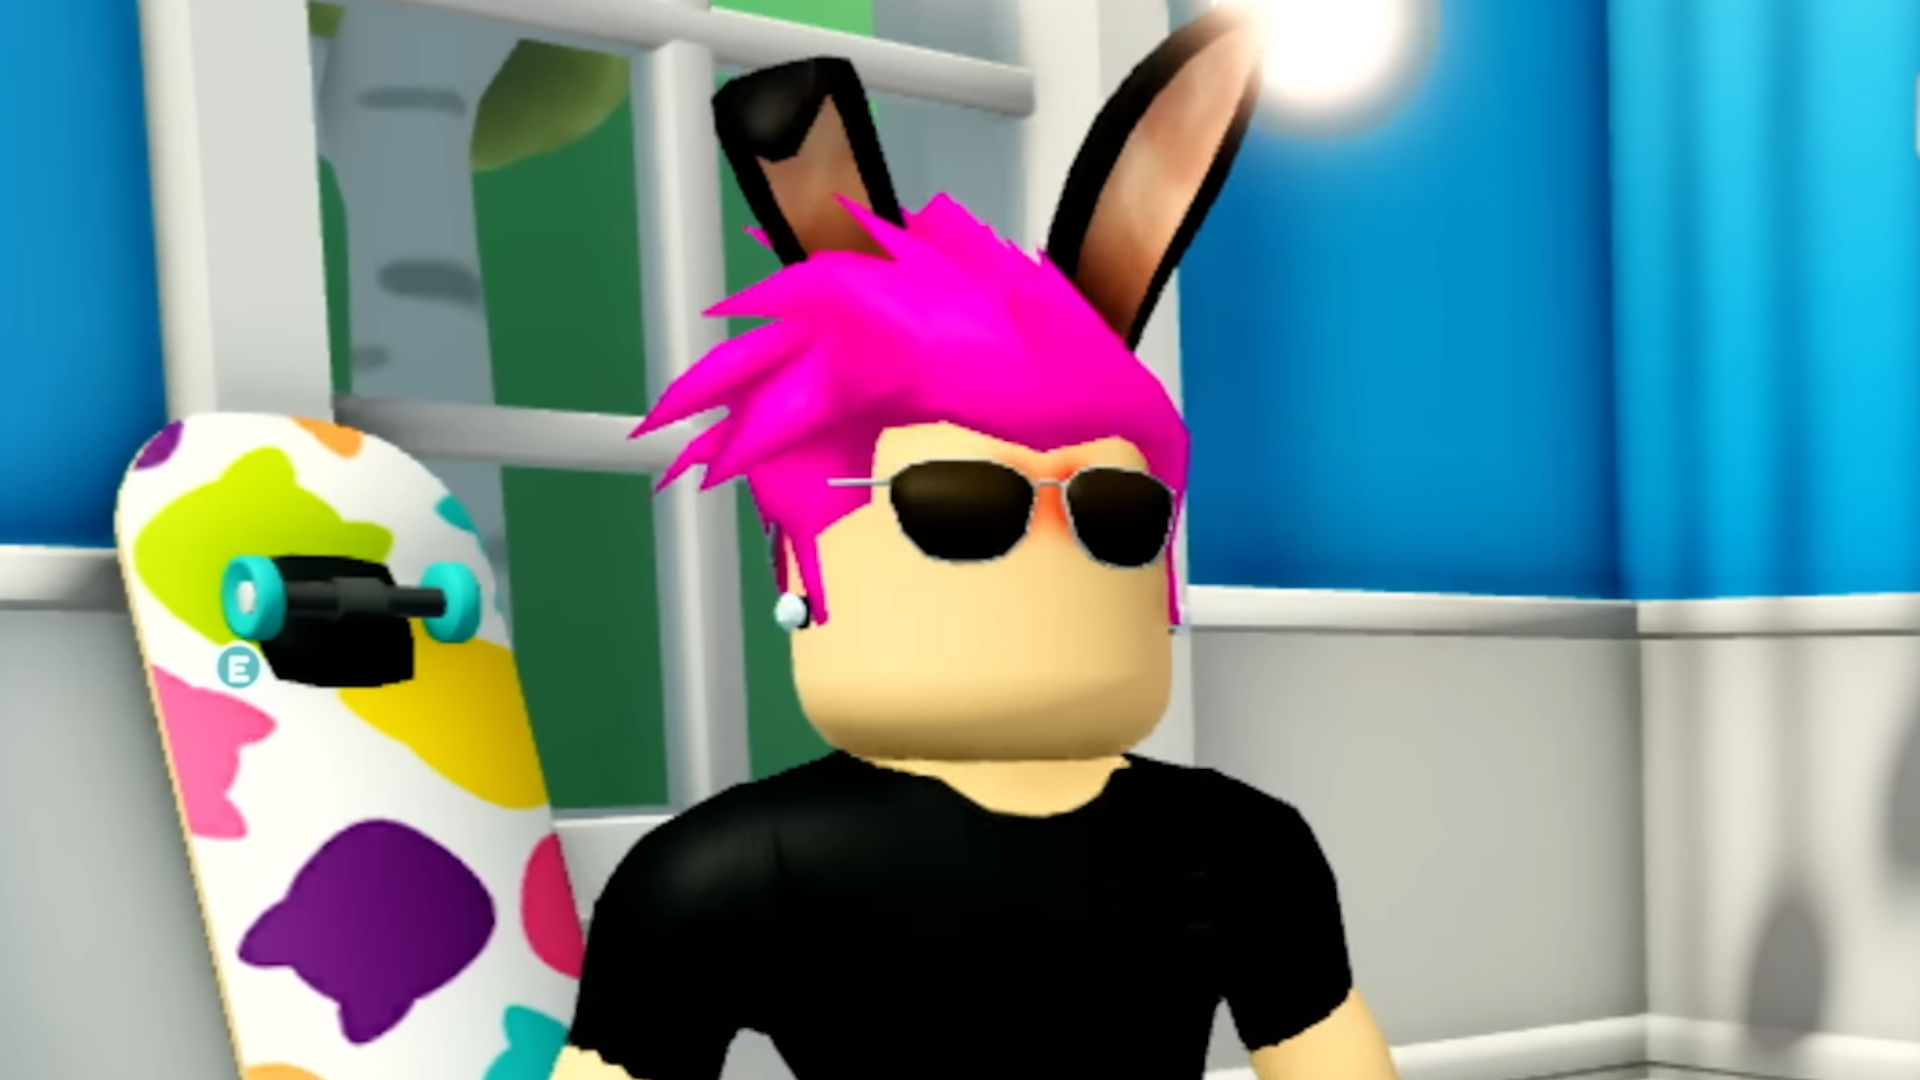 FREE) ALL FREE UGC LIMITEDS THAT ARE AVAILABLE - OCTOBER 2023 [ROBLOX] 